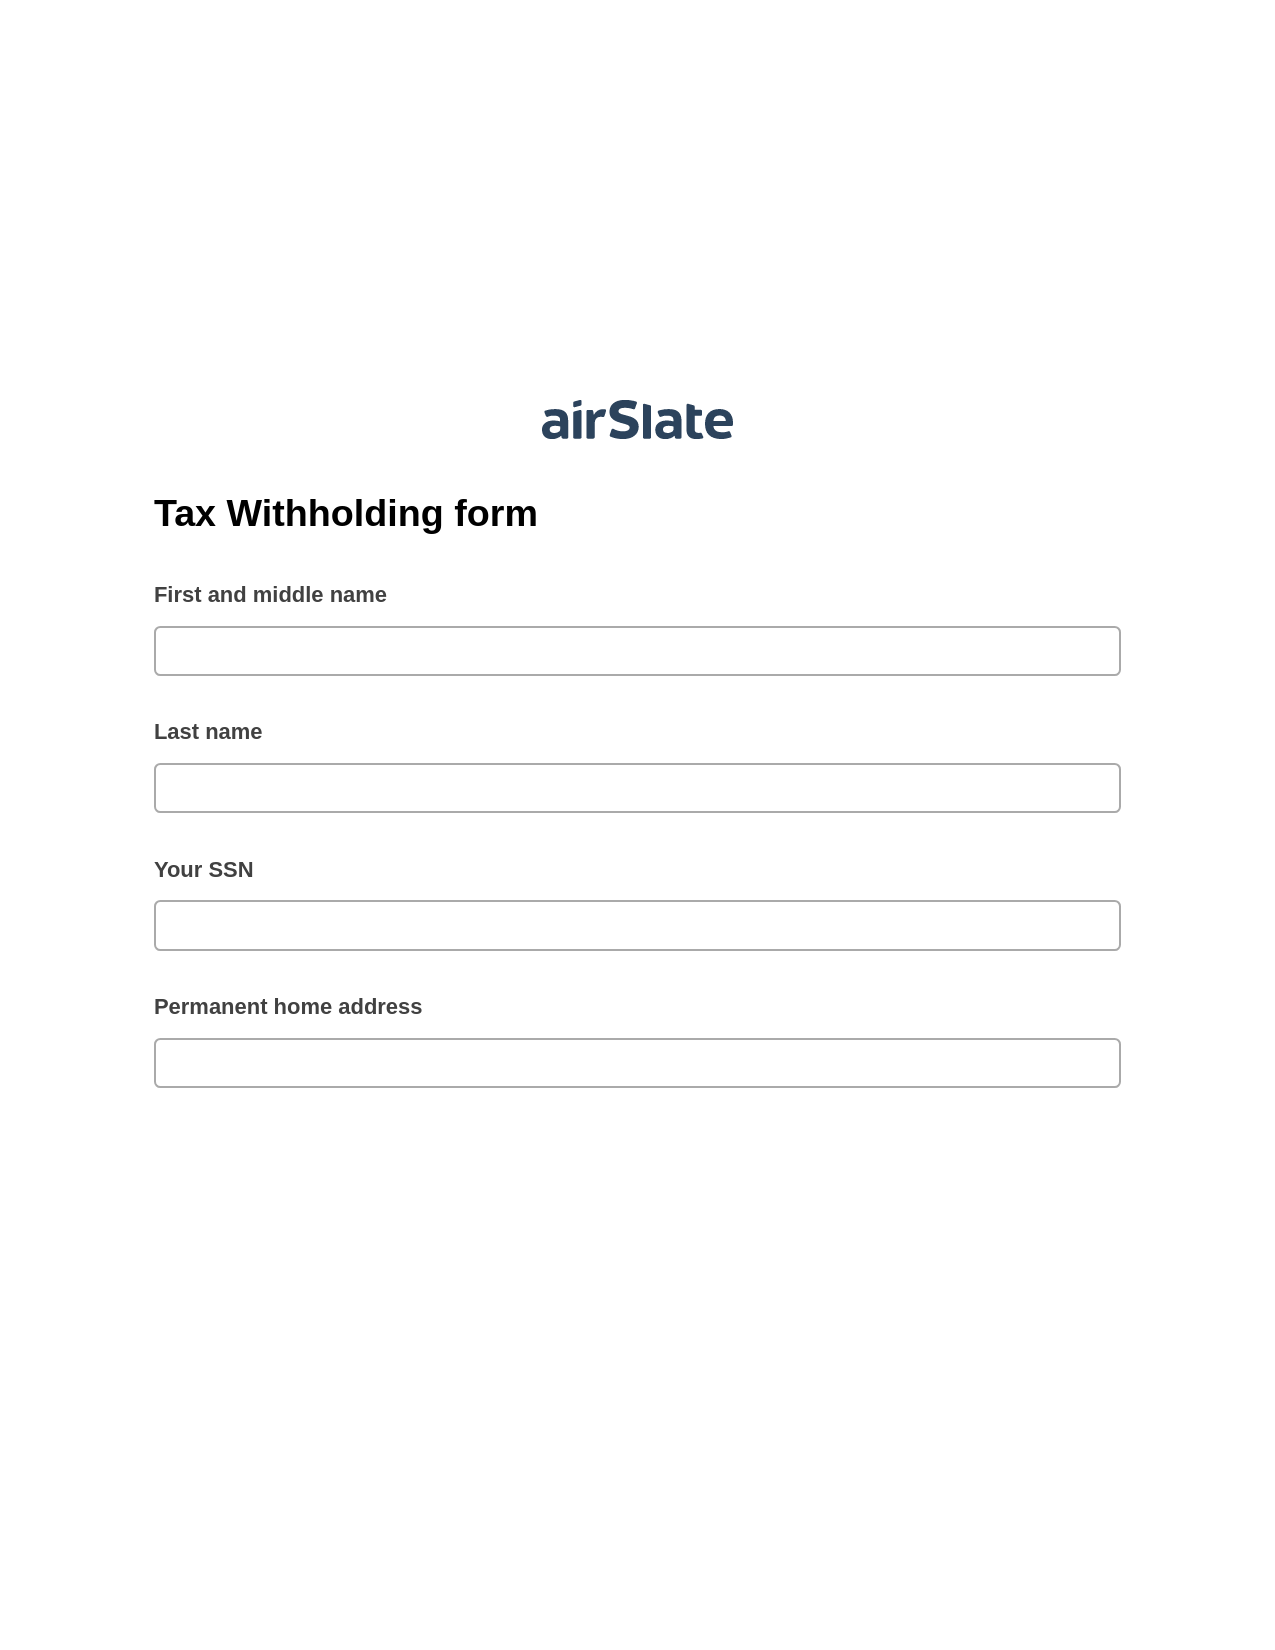 Multirole Tax Withholding form Pre-fill from NetSuite Records Bot, Document Hide Bot, Export to Smartsheet Bot